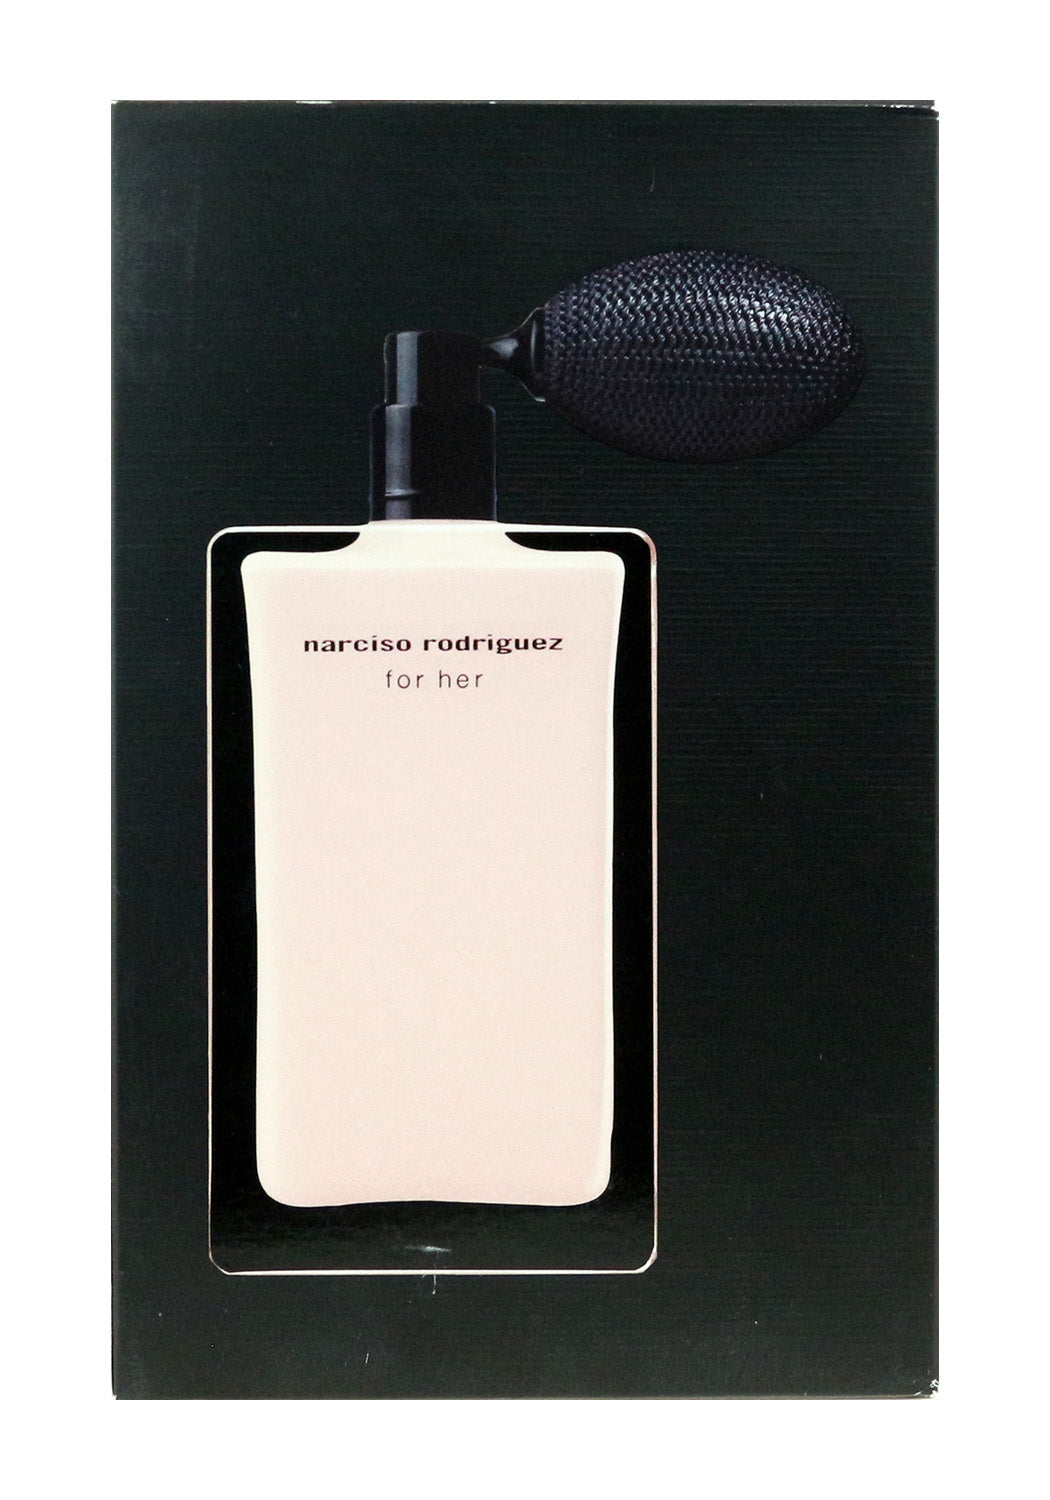 Narciso Rodriguez For Her Limited Edition Eau De Parfum Spray 2.5Oz/75ml In Box